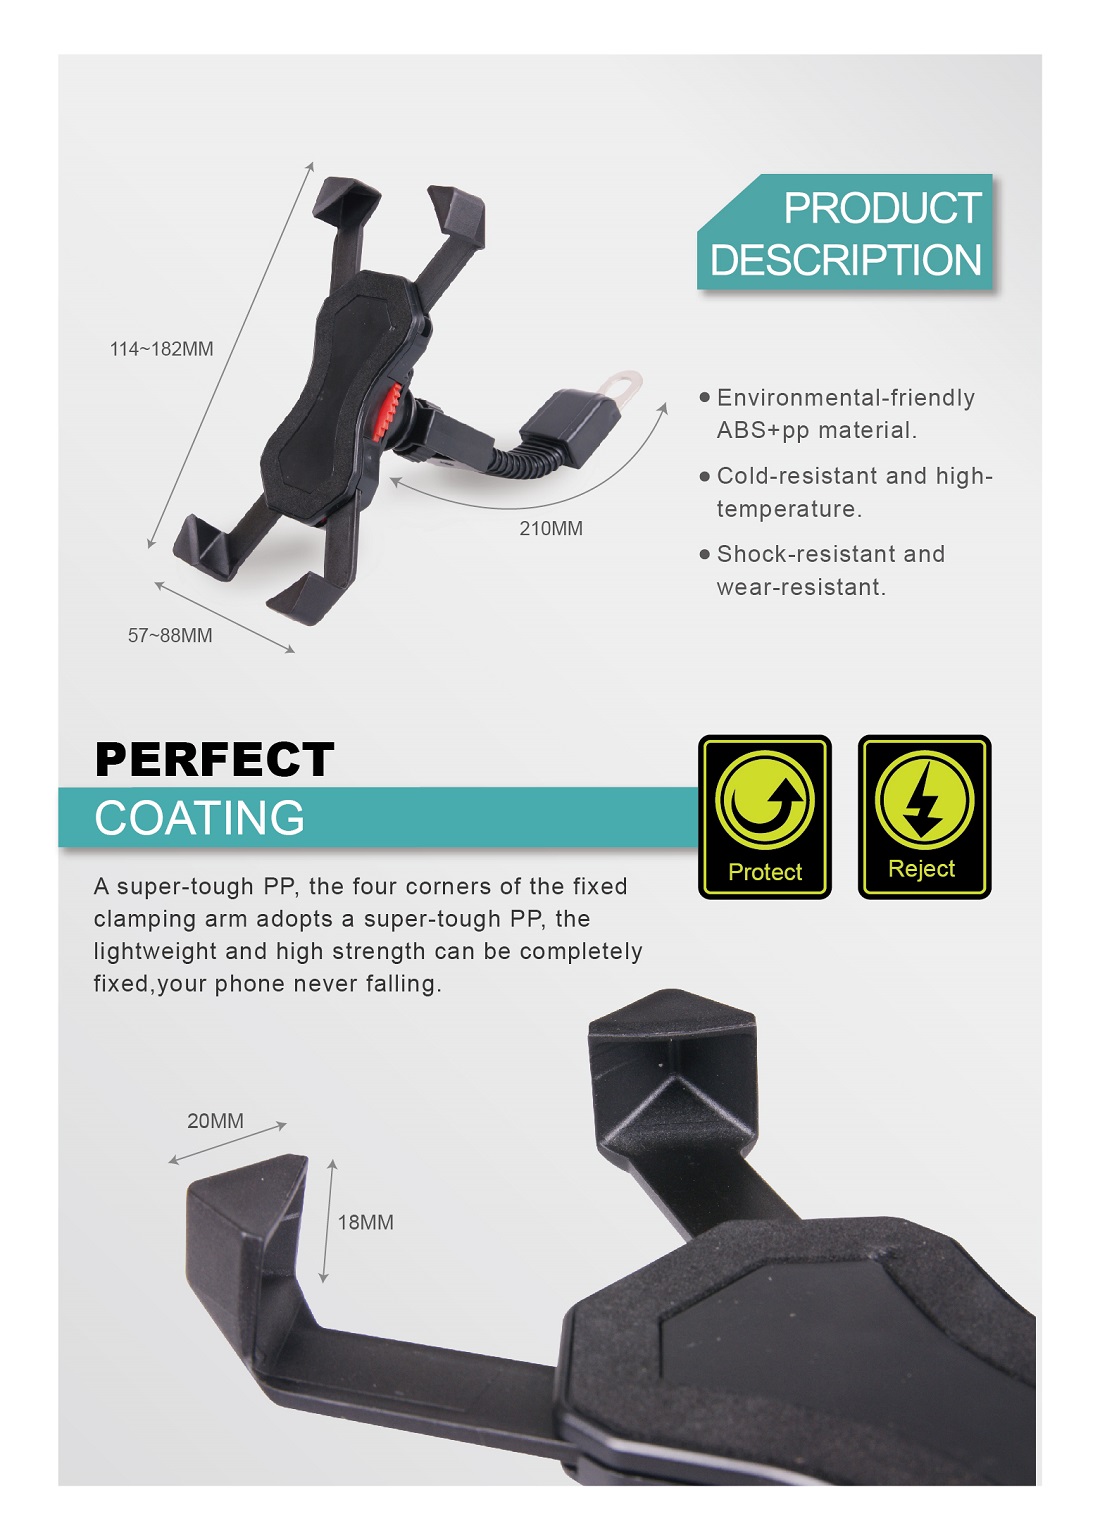 360 Degree Motorcycle Phone Holder HPA590